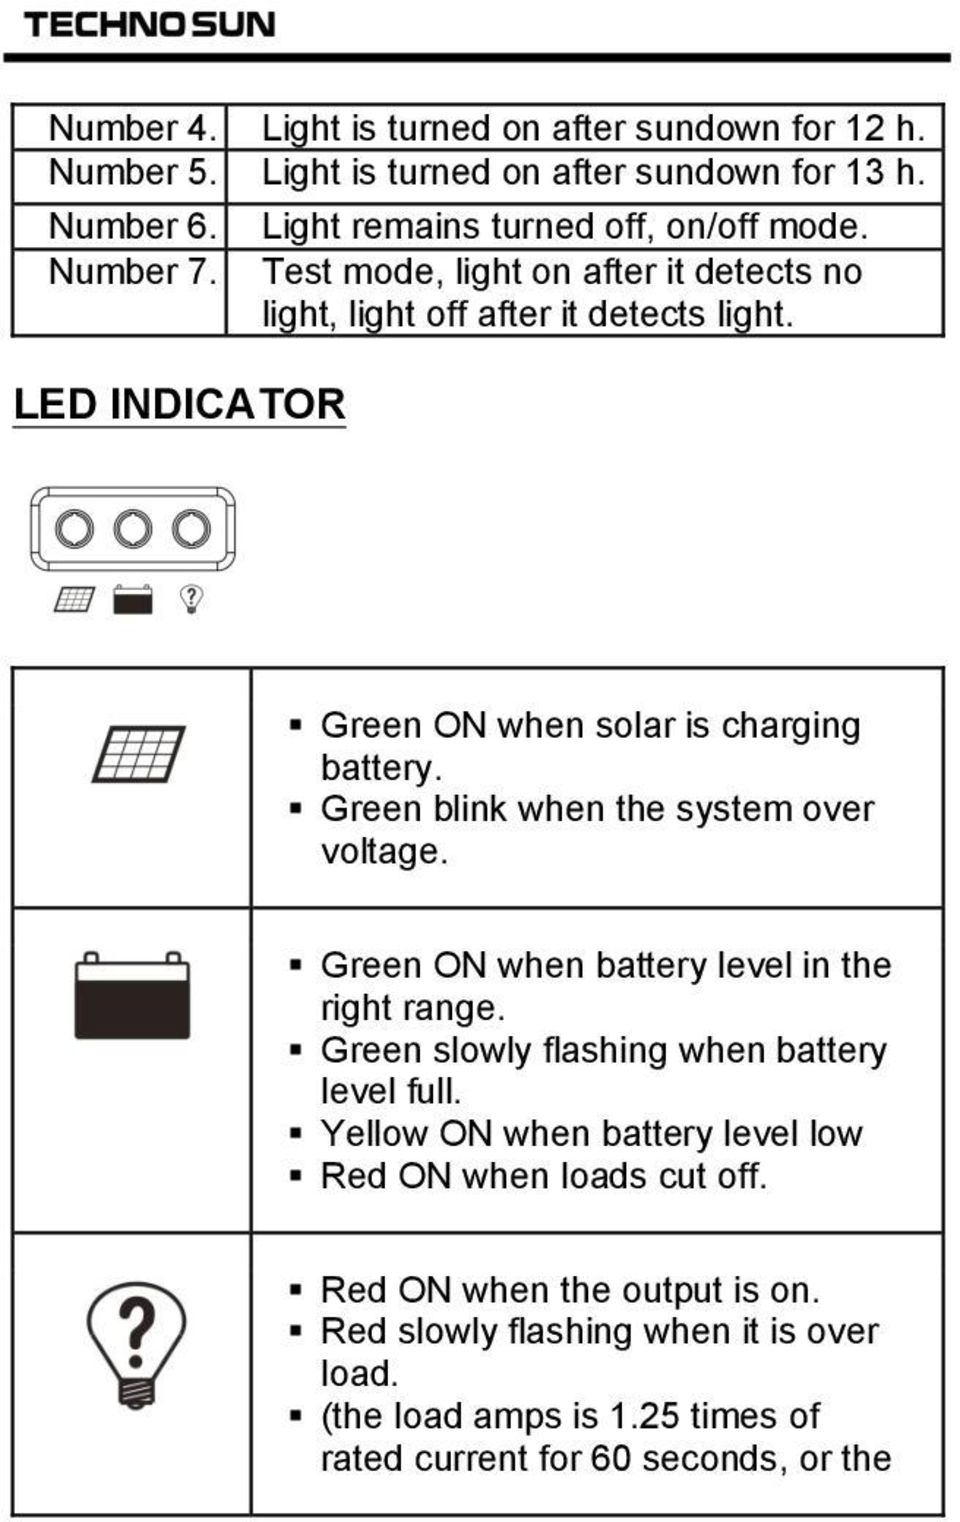 Green ON when solar is charging battery.! Green blink when the system over voltage.! Green ON when battery level in the right range.